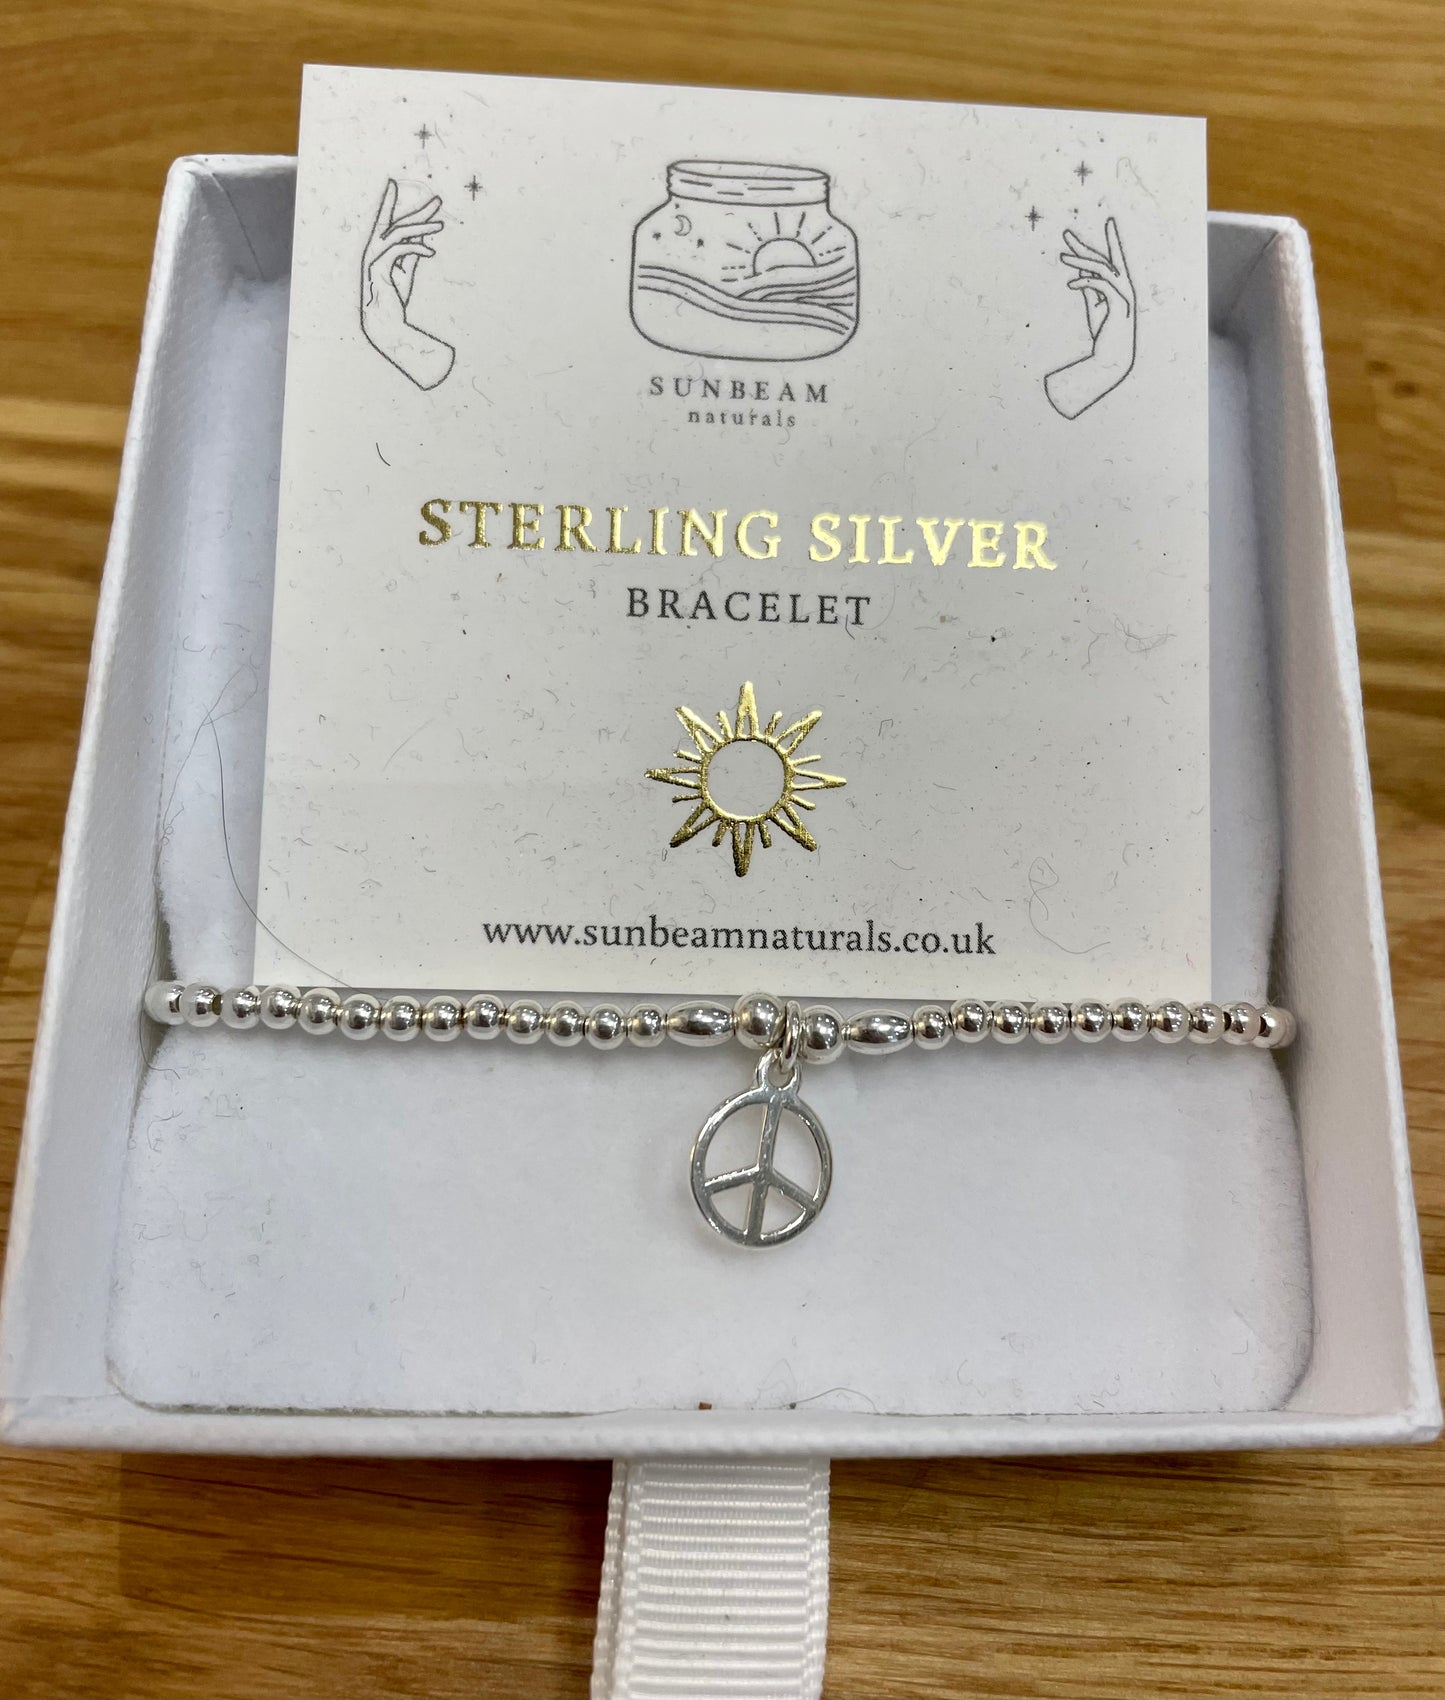 Sunbeam Naturals / Sterling Silver - Peace charm